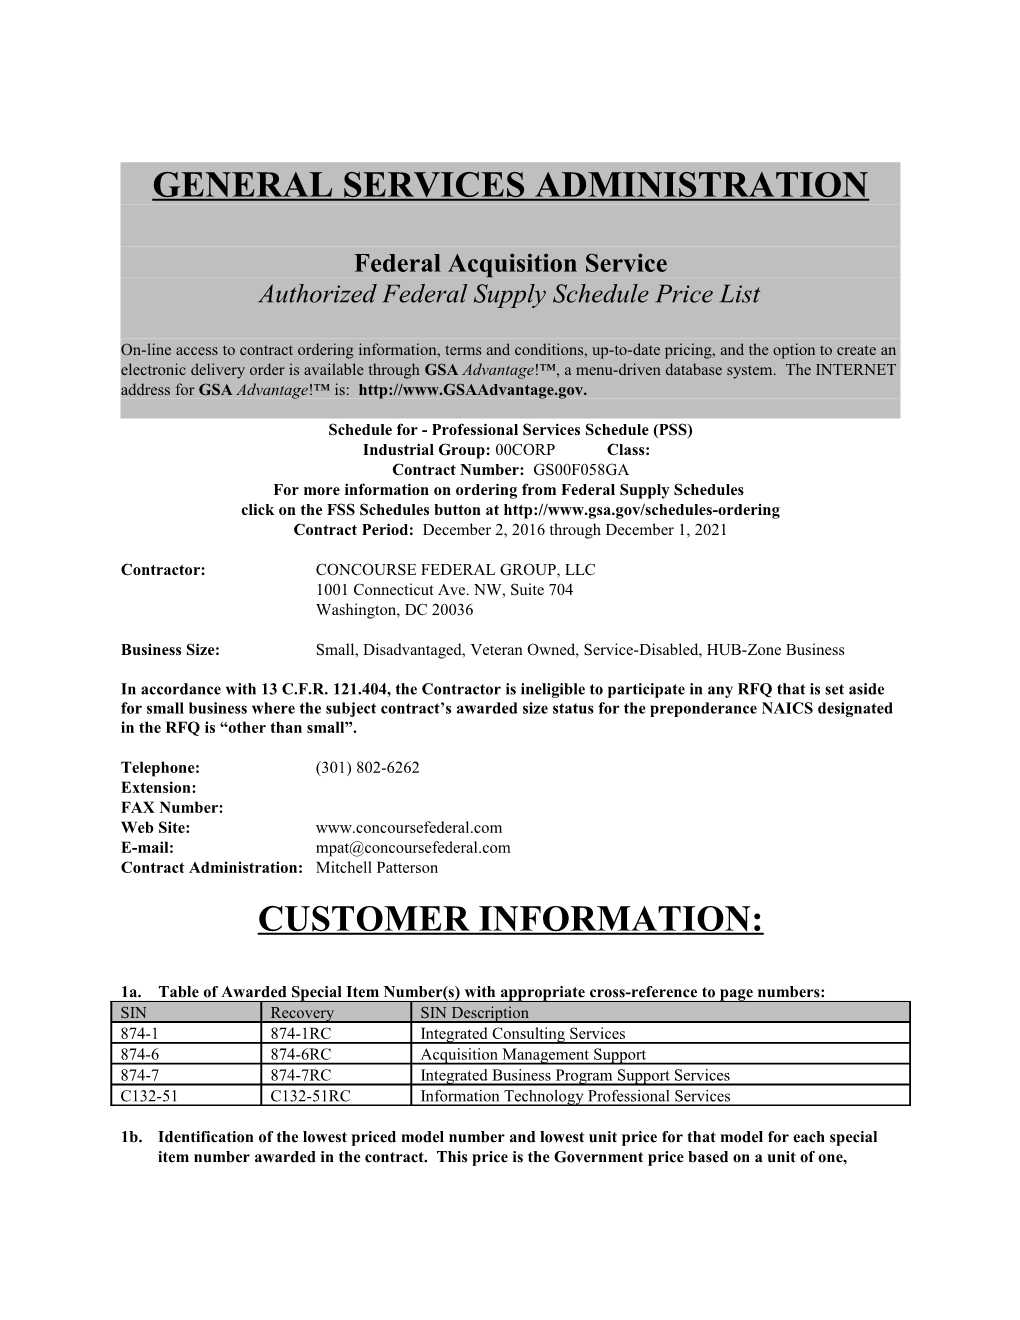 General Services Administration s11